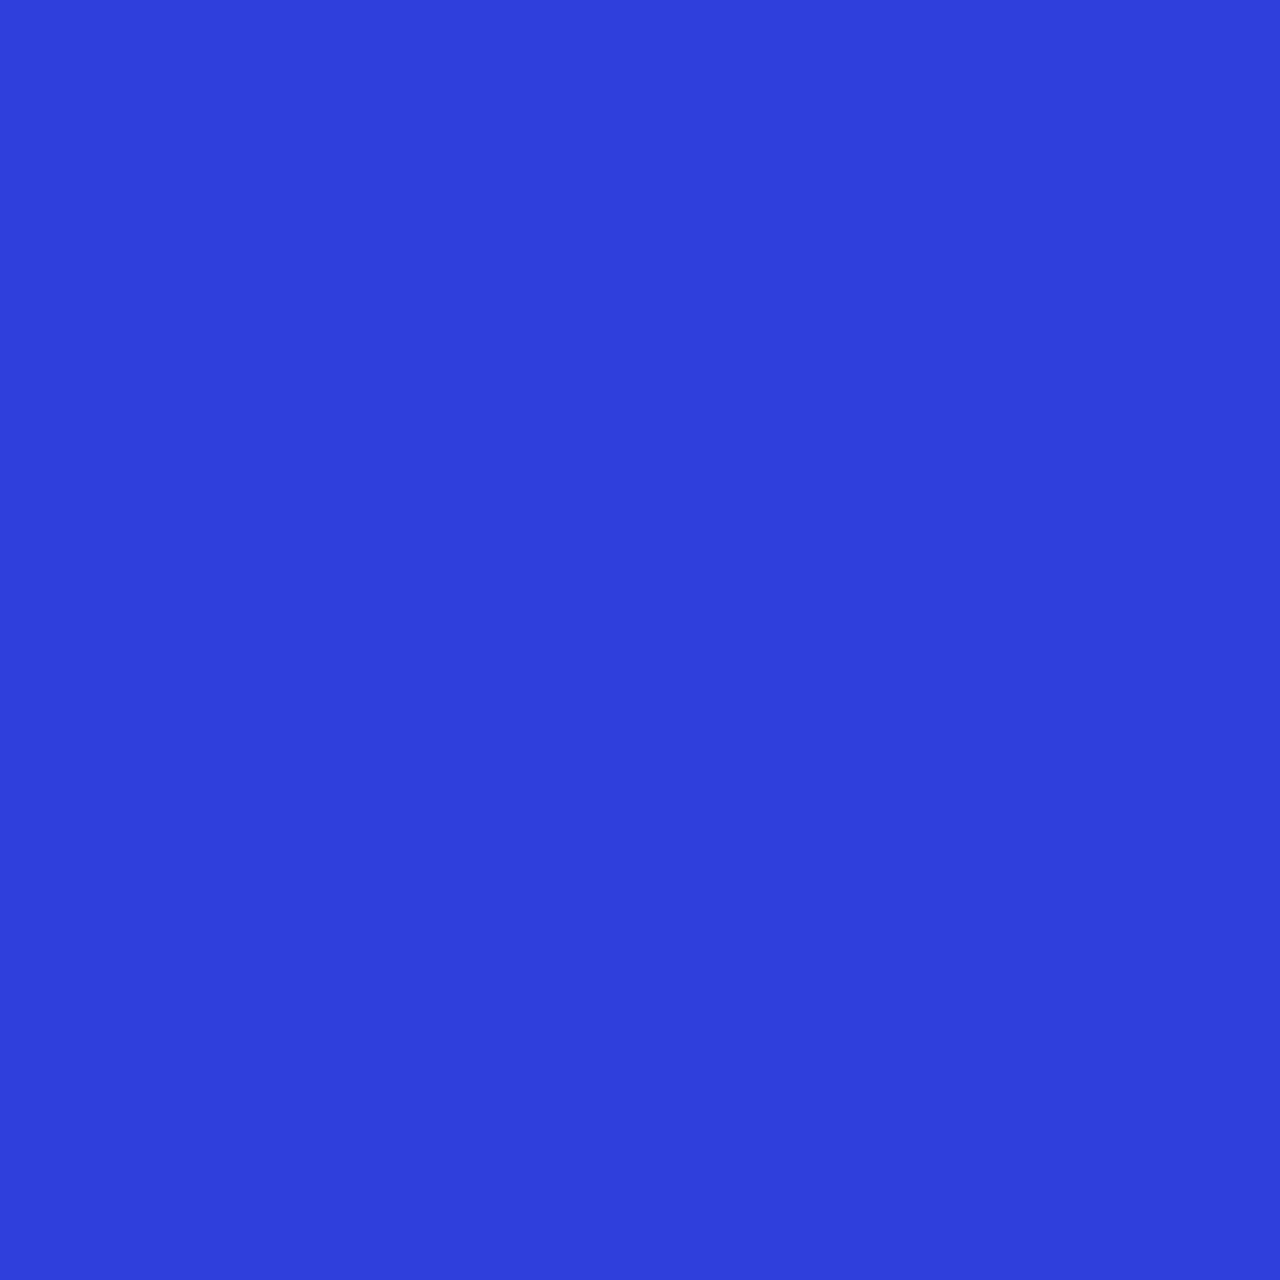 Different Shades Of Blue  Blue shades colors, Types of blue colour,  Pantone color chart